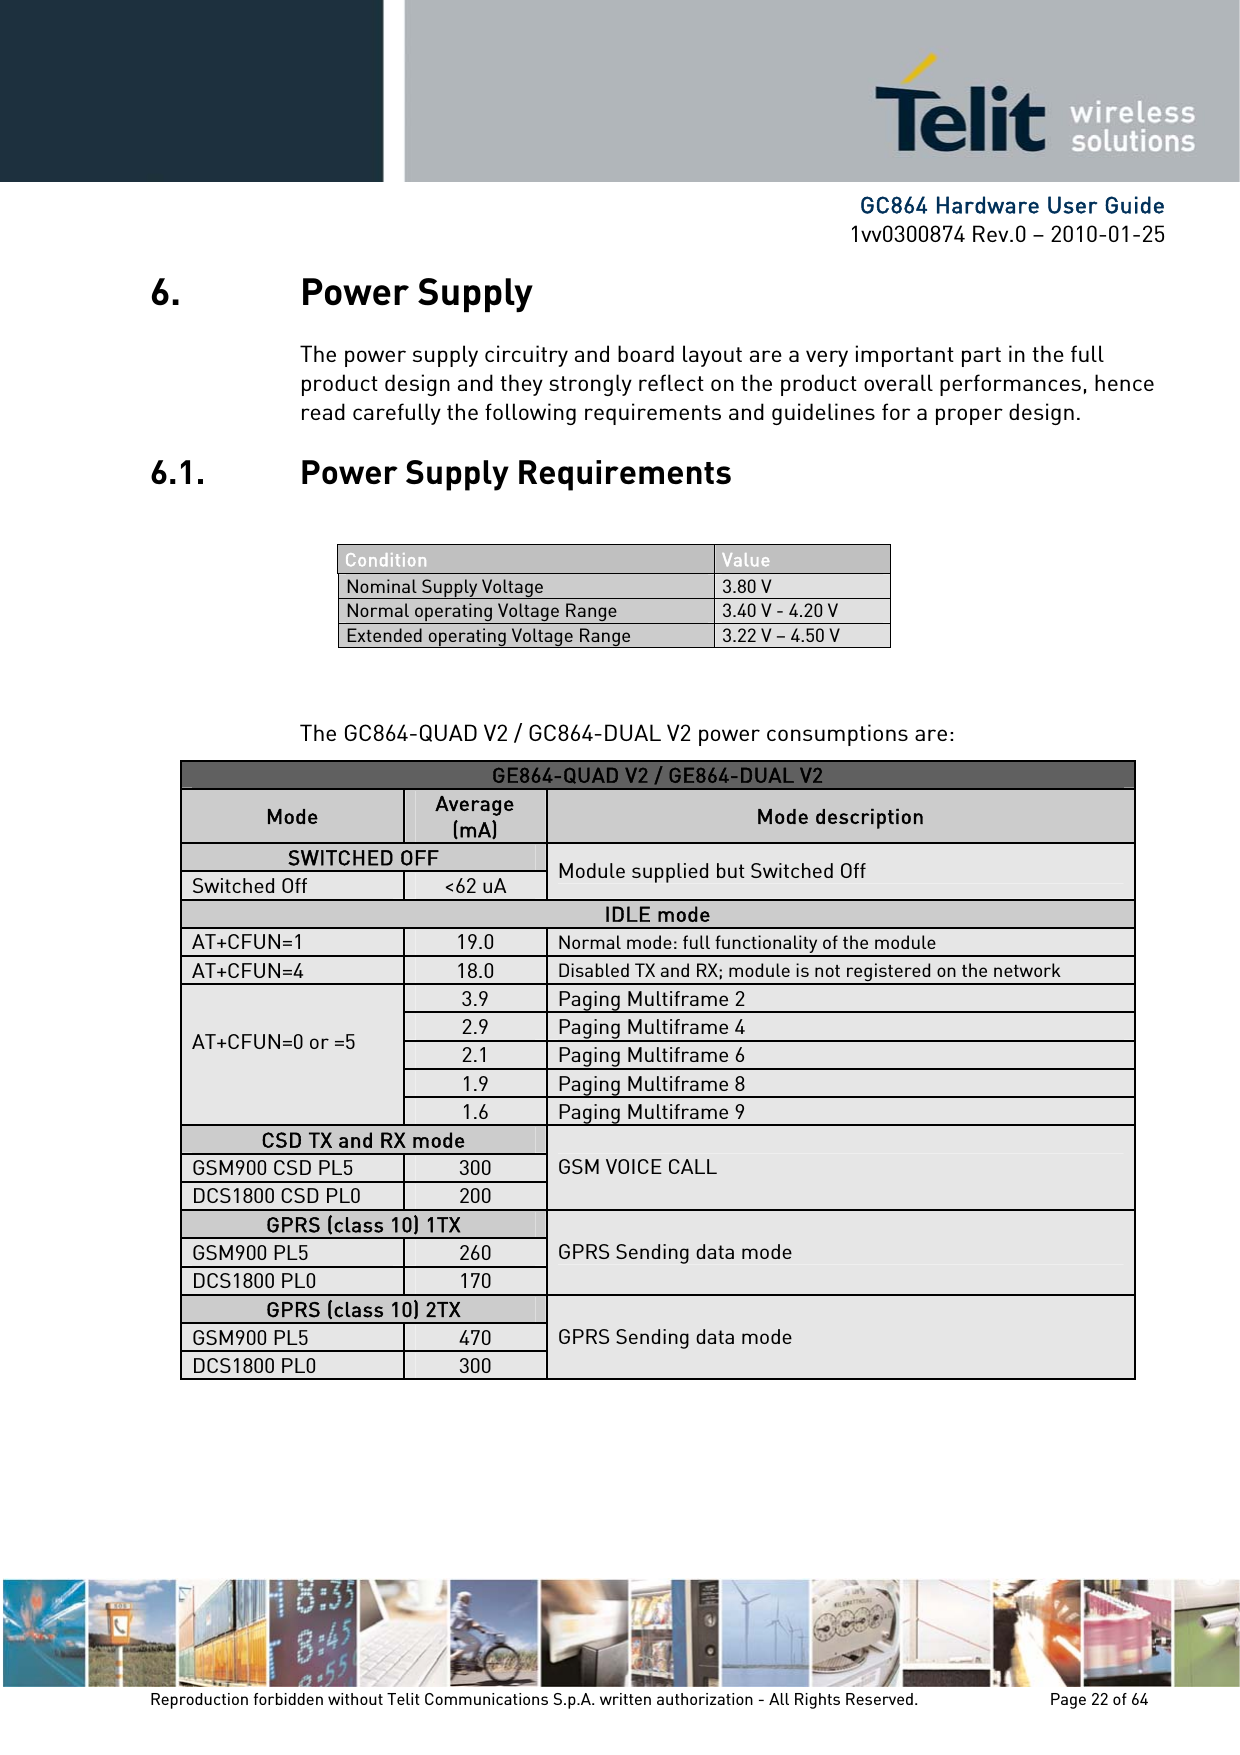      GC864 Hardware User Guide 1vv0300874 Rev.0 – 2010-01-25 Reproduction forbidden without Telit Communications S.p.A. written authorization - All Rights Reserved.    Page 22 of 64  6. Power Supply The power supply circuitry and board layout are a very important part in the full product design and they strongly reflect on the product overall performances, hence read carefully the following requirements and guidelines for a proper design. 6.1. Power Supply Requirements  Condition  Value Nominal Supply Voltage 3.80 V Normal operating Voltage Range 3.40 V - 4.20 V Extended operating Voltage Range 3.22 V – 4.50 V   The GC864-QUAD V2 / GC864-DUAL V2 power consumptions are:  GE864-QUAD V2 / GE864-DUAL V2 Mode Average (mA) Mode description SWITCHED OFF Switched Off &lt;62 uA Module supplied but Switched Off IDLE mode AT+CFUN=1 19.0 Normal mode: full functionality of the module AT+CFUN=4 18.0 Disabled TX and RX; module is not registered on the network 3.9 Paging Multiframe 2 2.9 Paging Multiframe 4 2.1 Paging Multiframe 6 1.9 Paging Multiframe 8 AT+CFUN=0 or =5  1.6 Paging Multiframe 9 CSD TX and RX mode GSM900 CSD PL5 300 DCS1800 CSD PL0 200 GSM VOICE CALL GPRS (class 10) 1TX GSM900 PL5 260 DCS1800 PL0 170 GPRS Sending data mode GPRS (class 10) 2TX GSM900 PL5 470 DCS1800 PL0 300 GPRS Sending data mode  